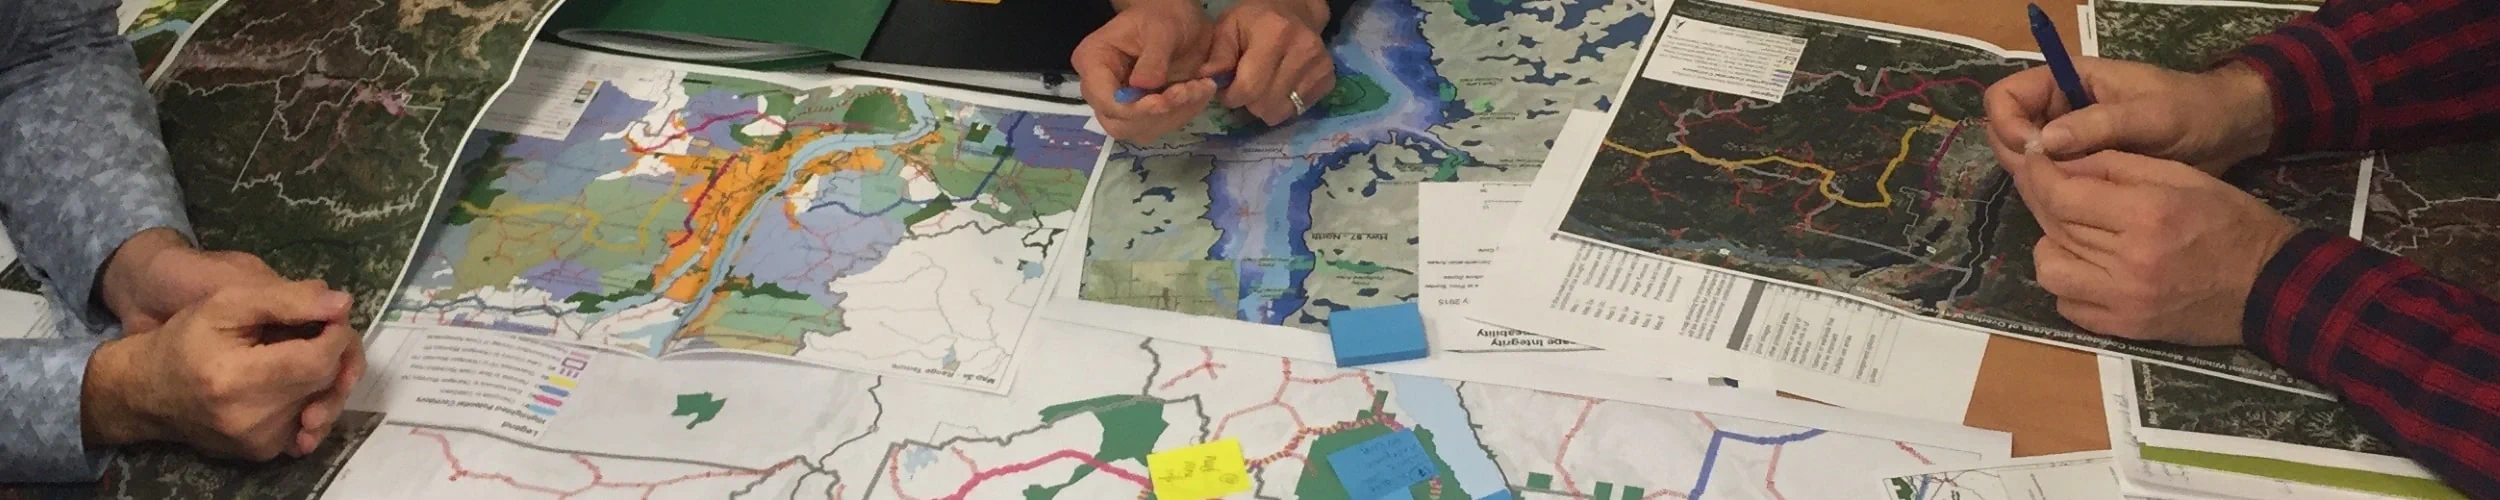 OCCP member working with others, examining maps on a table